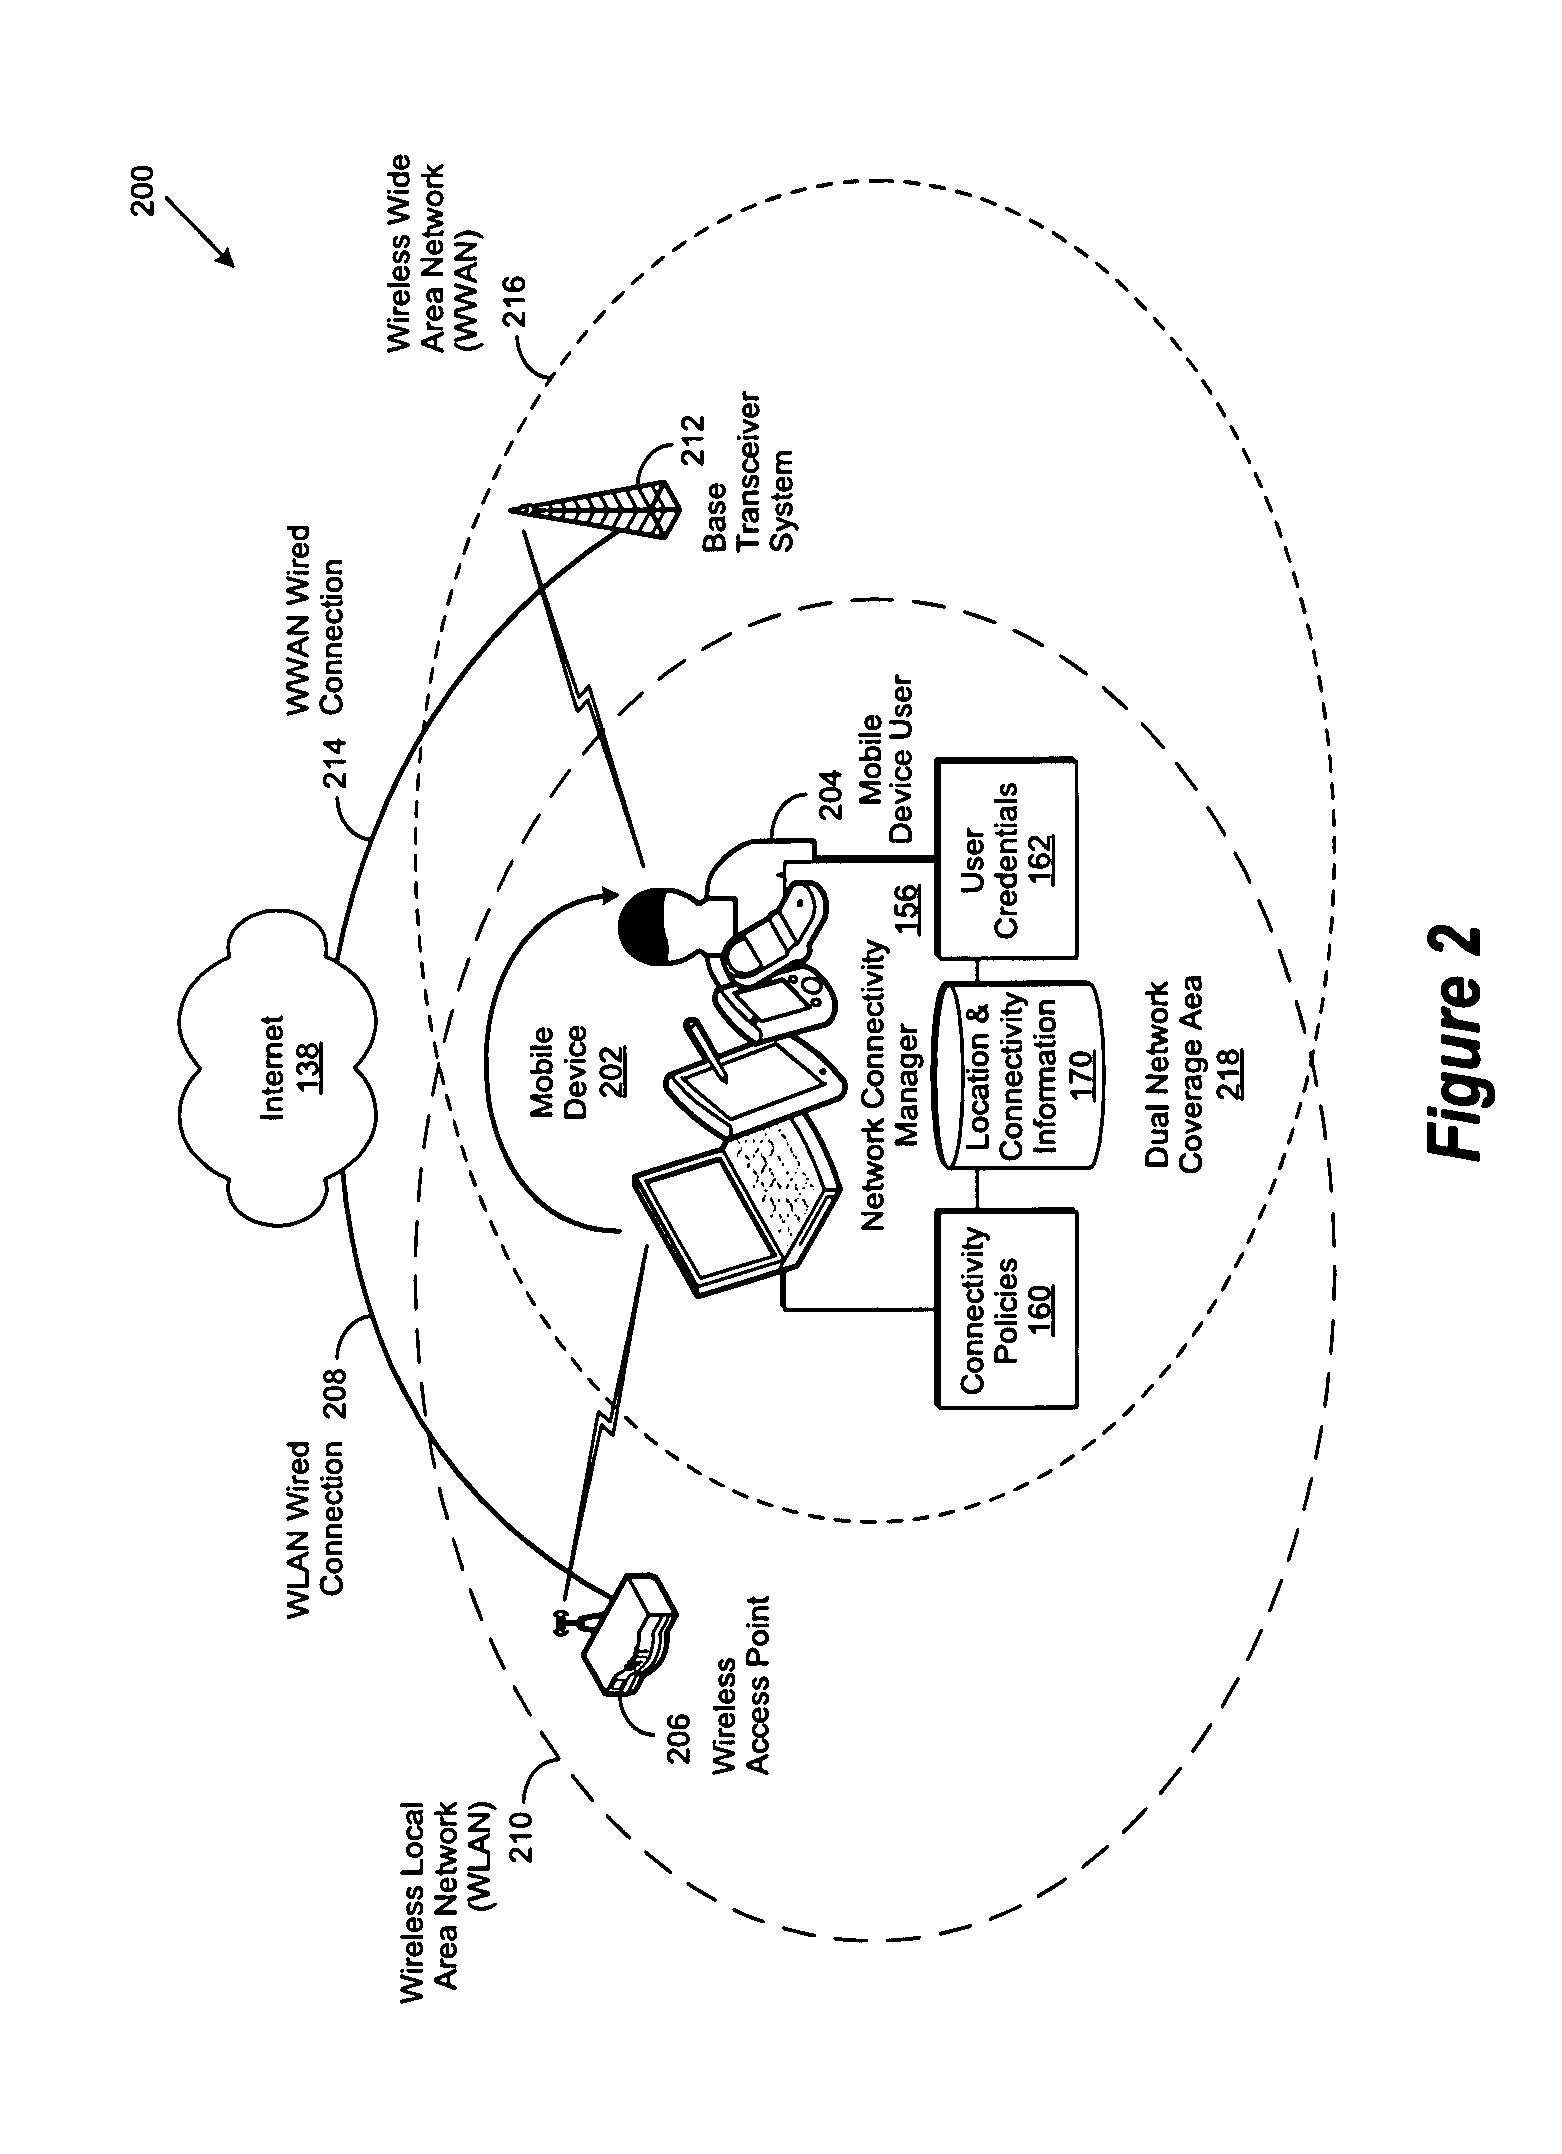 Connectivity manager with location services